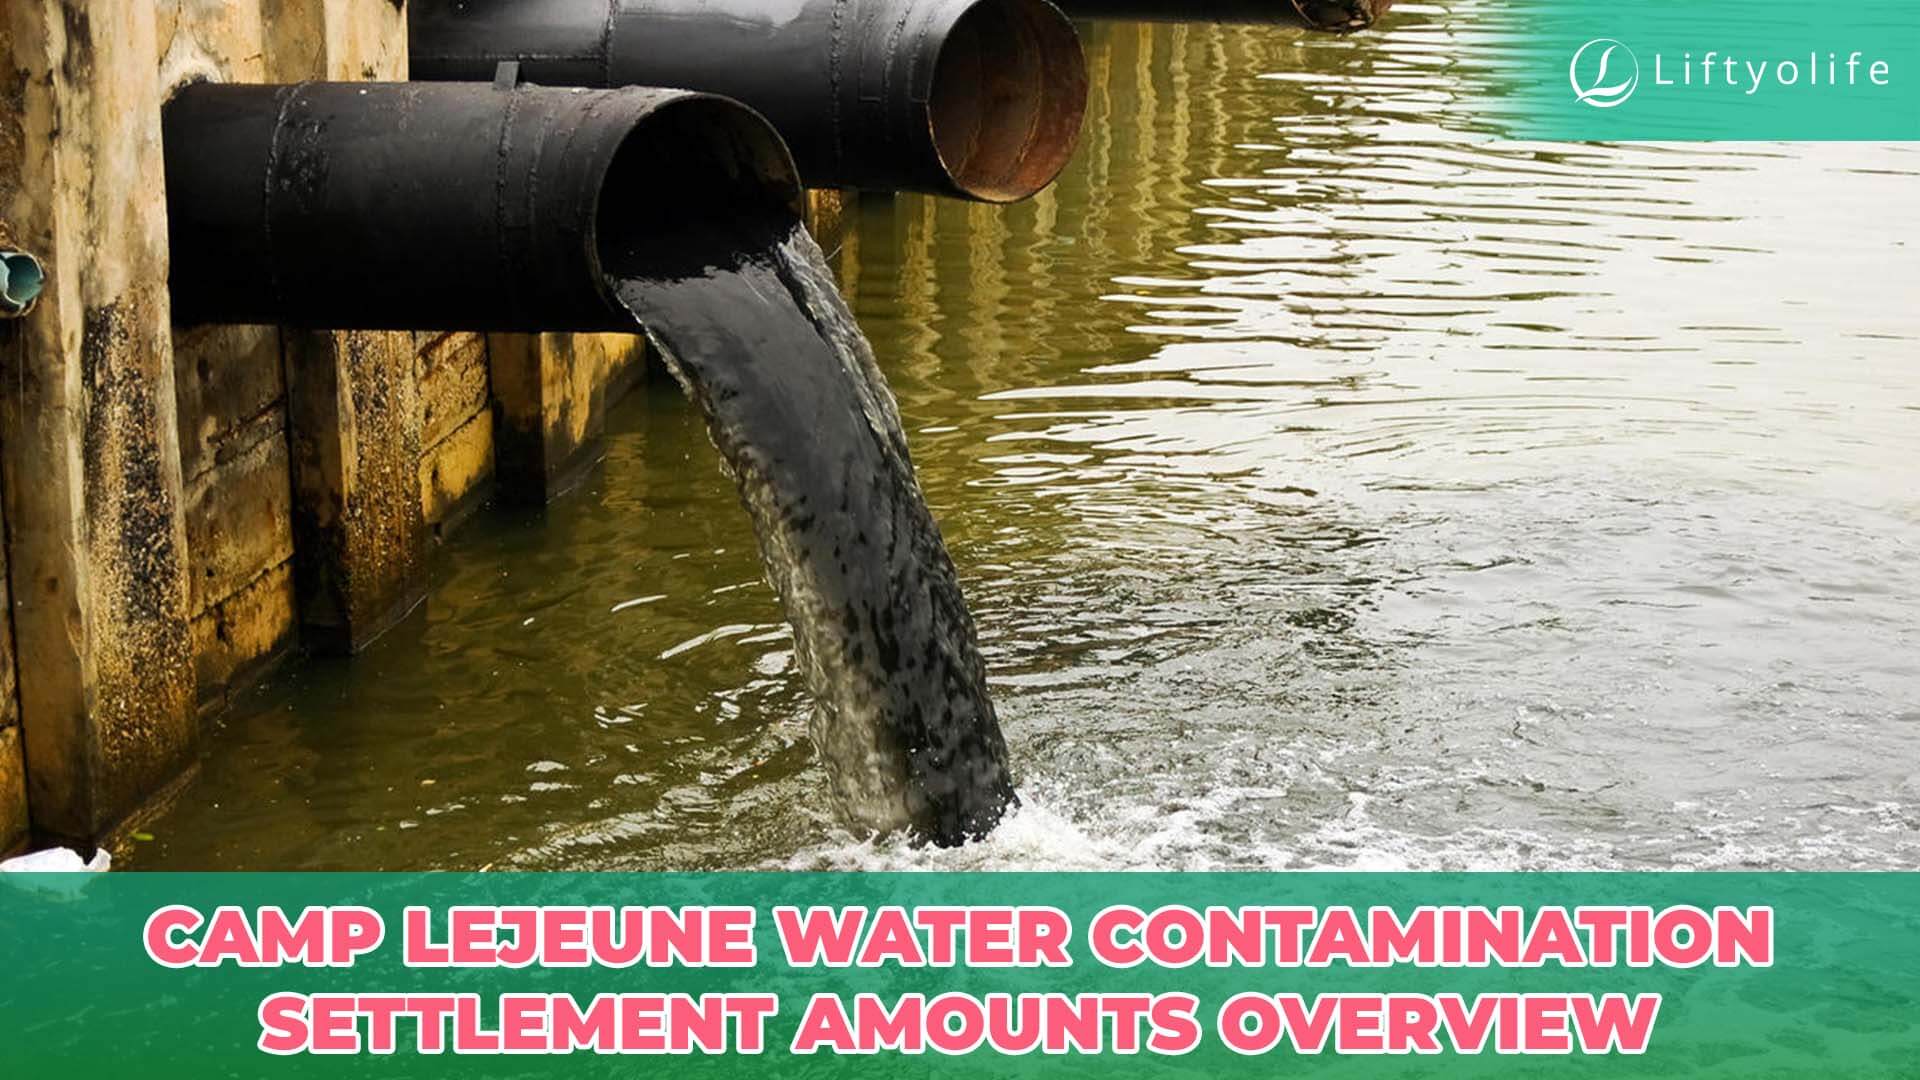 What Are The Camp Lejeune Water Contamination Settlement Amounts?